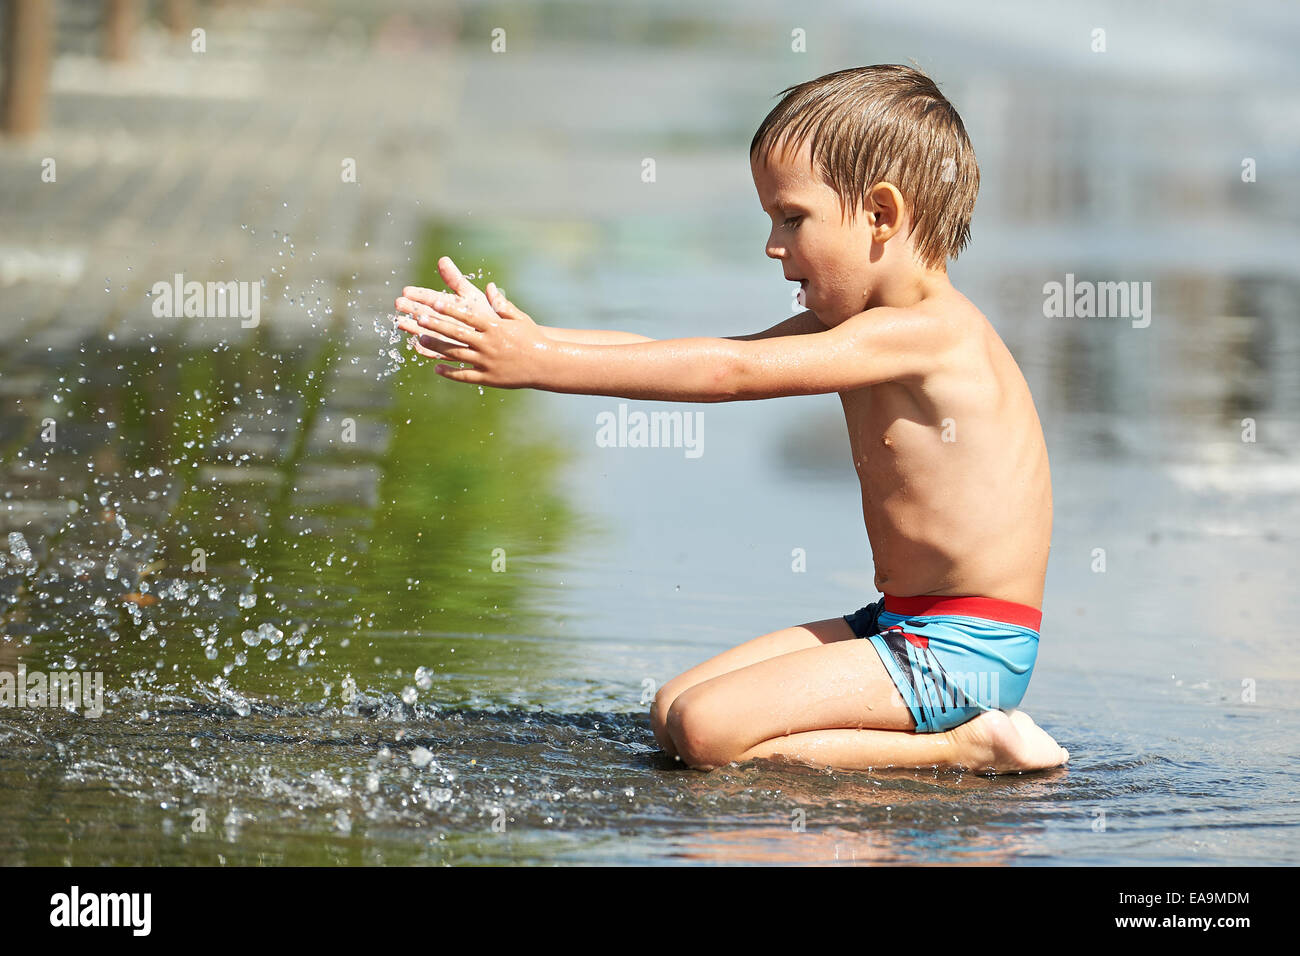 Little boy playing with water in a puddle in the park Stock Photo